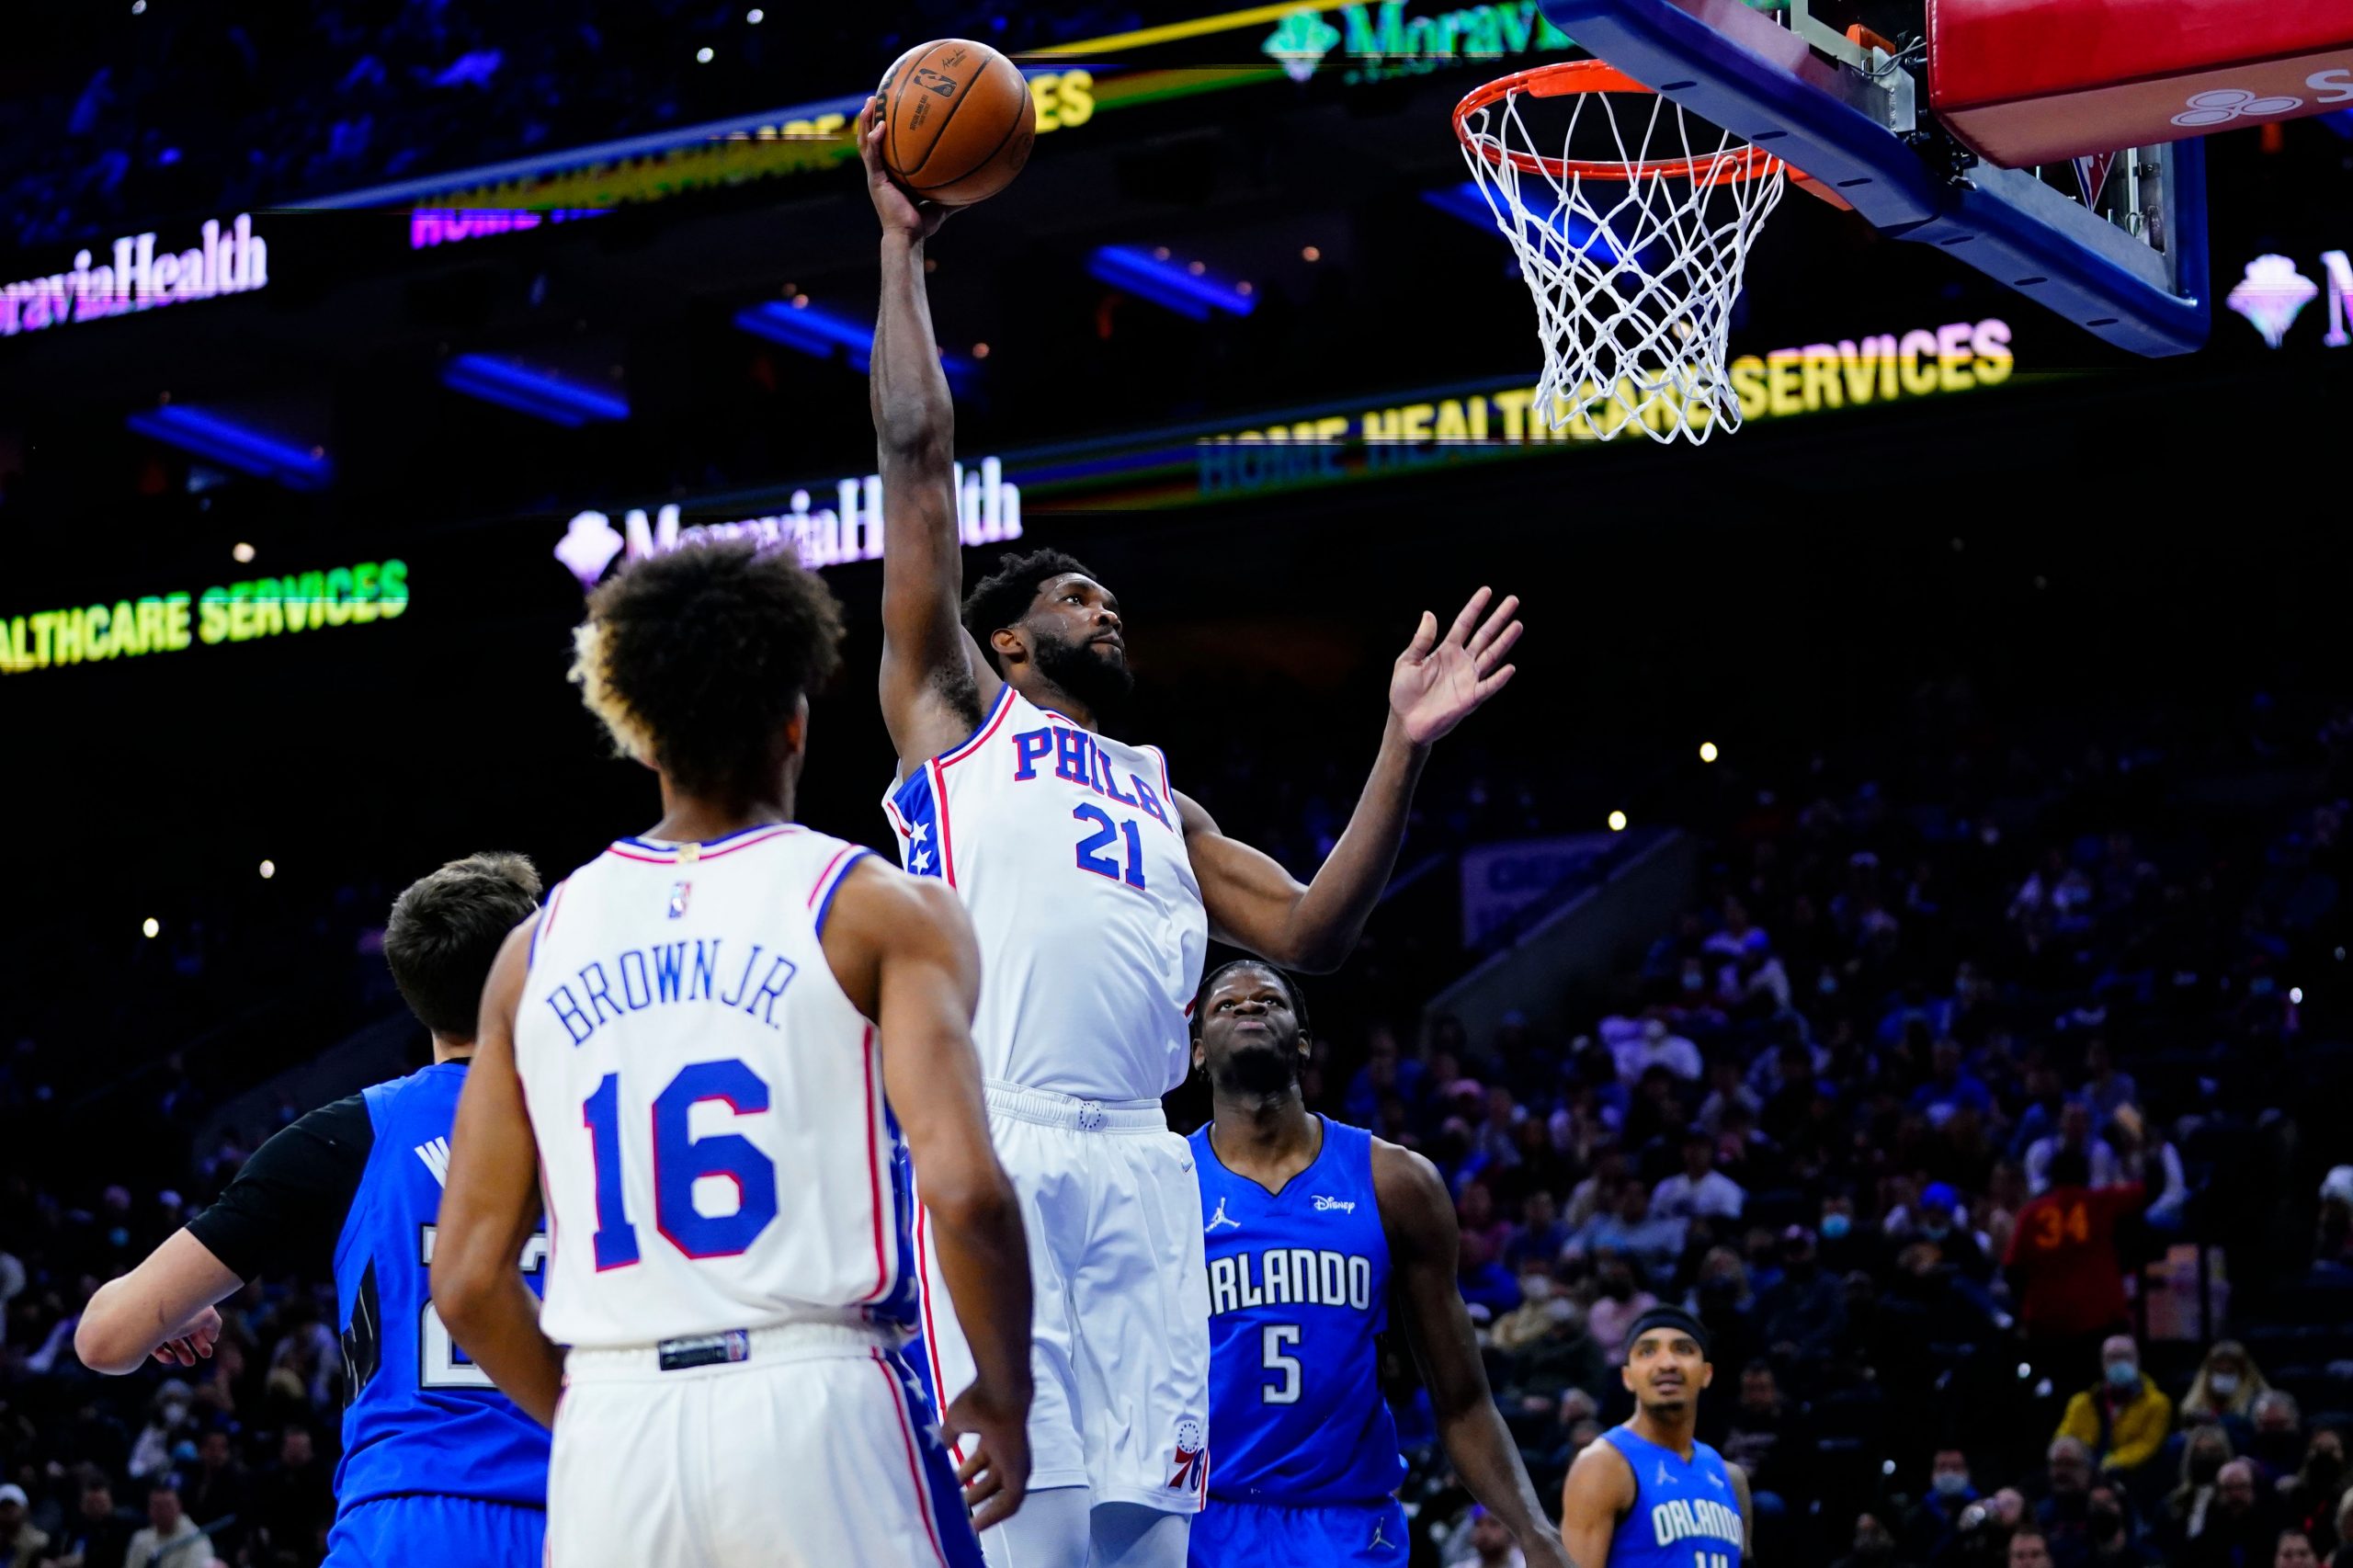 NBA: Embiid ties career high with 50 points, 76ers beat Magic